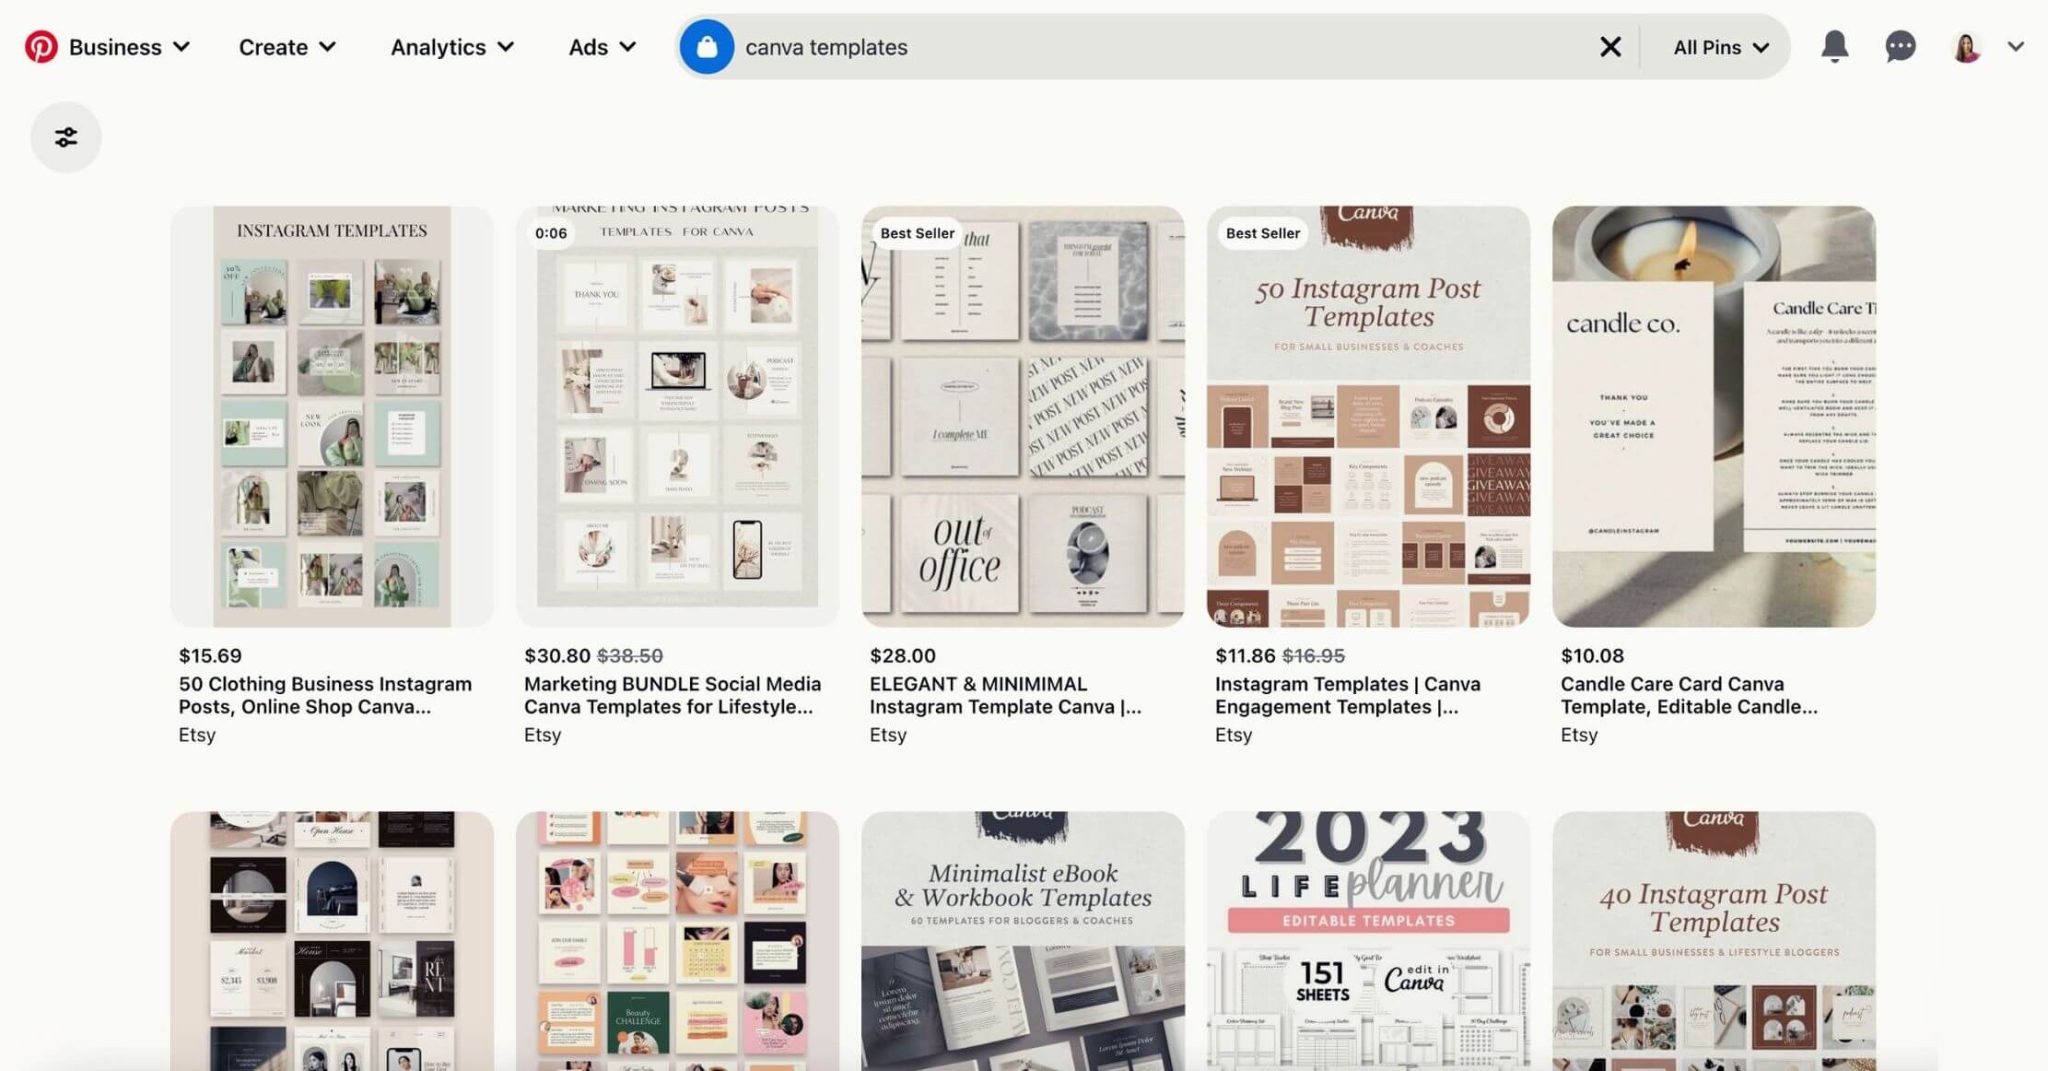 Screenshot of Pinterest's homepage and their Canva templates